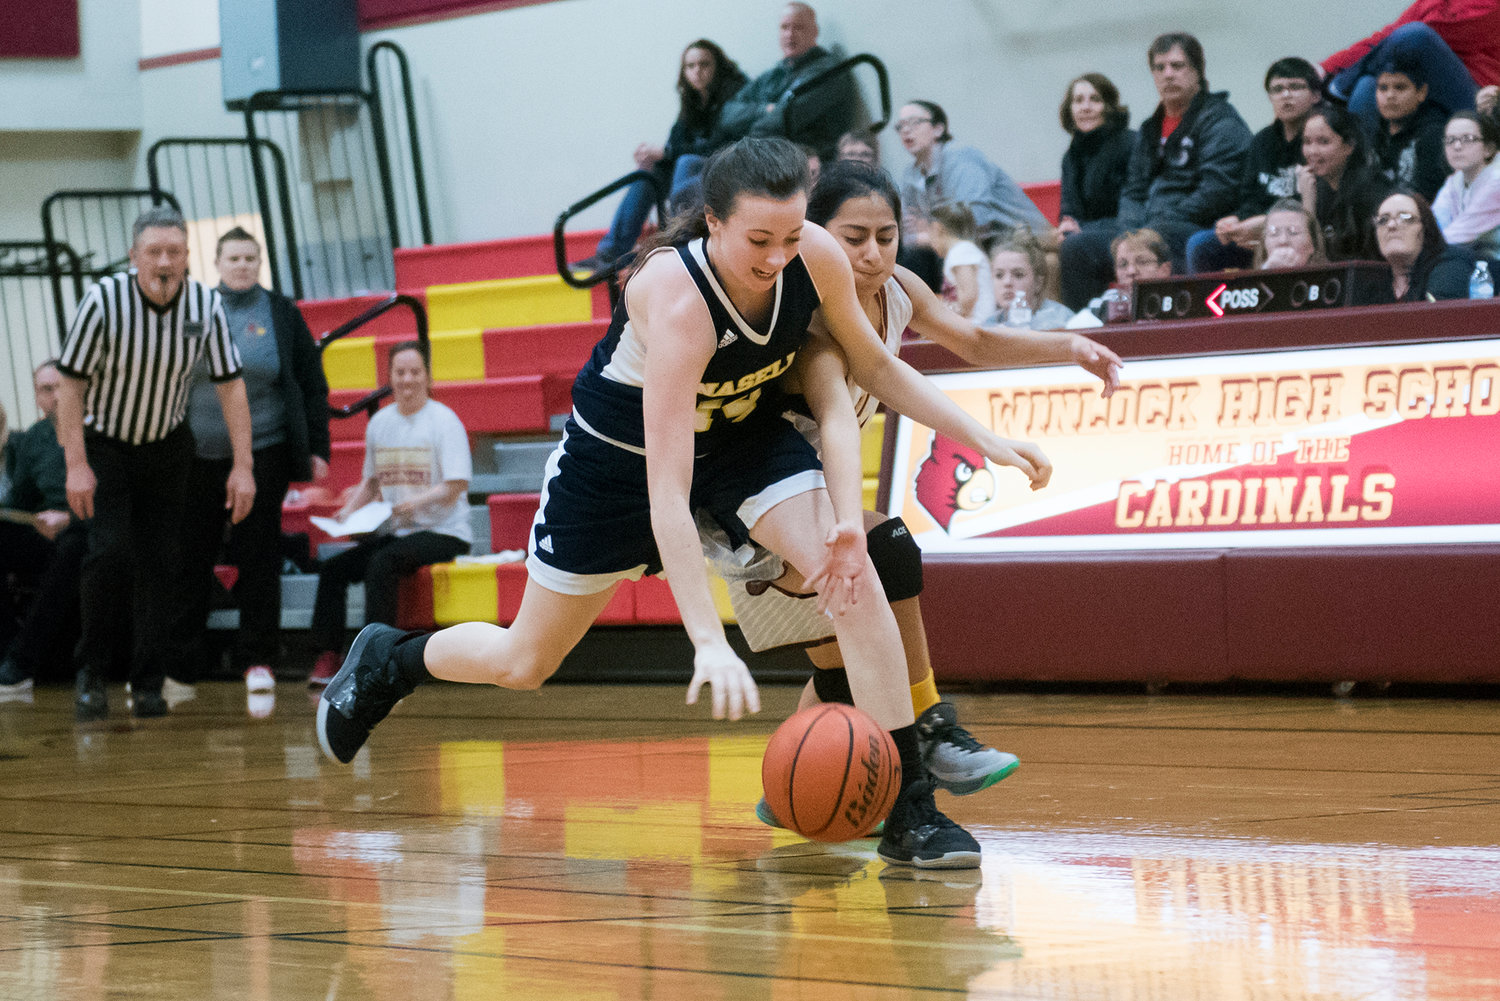 Images from a non-league girls basketball game between Winlock and Naselle at Winlock High School on Friday, Dec. 6, 2019.